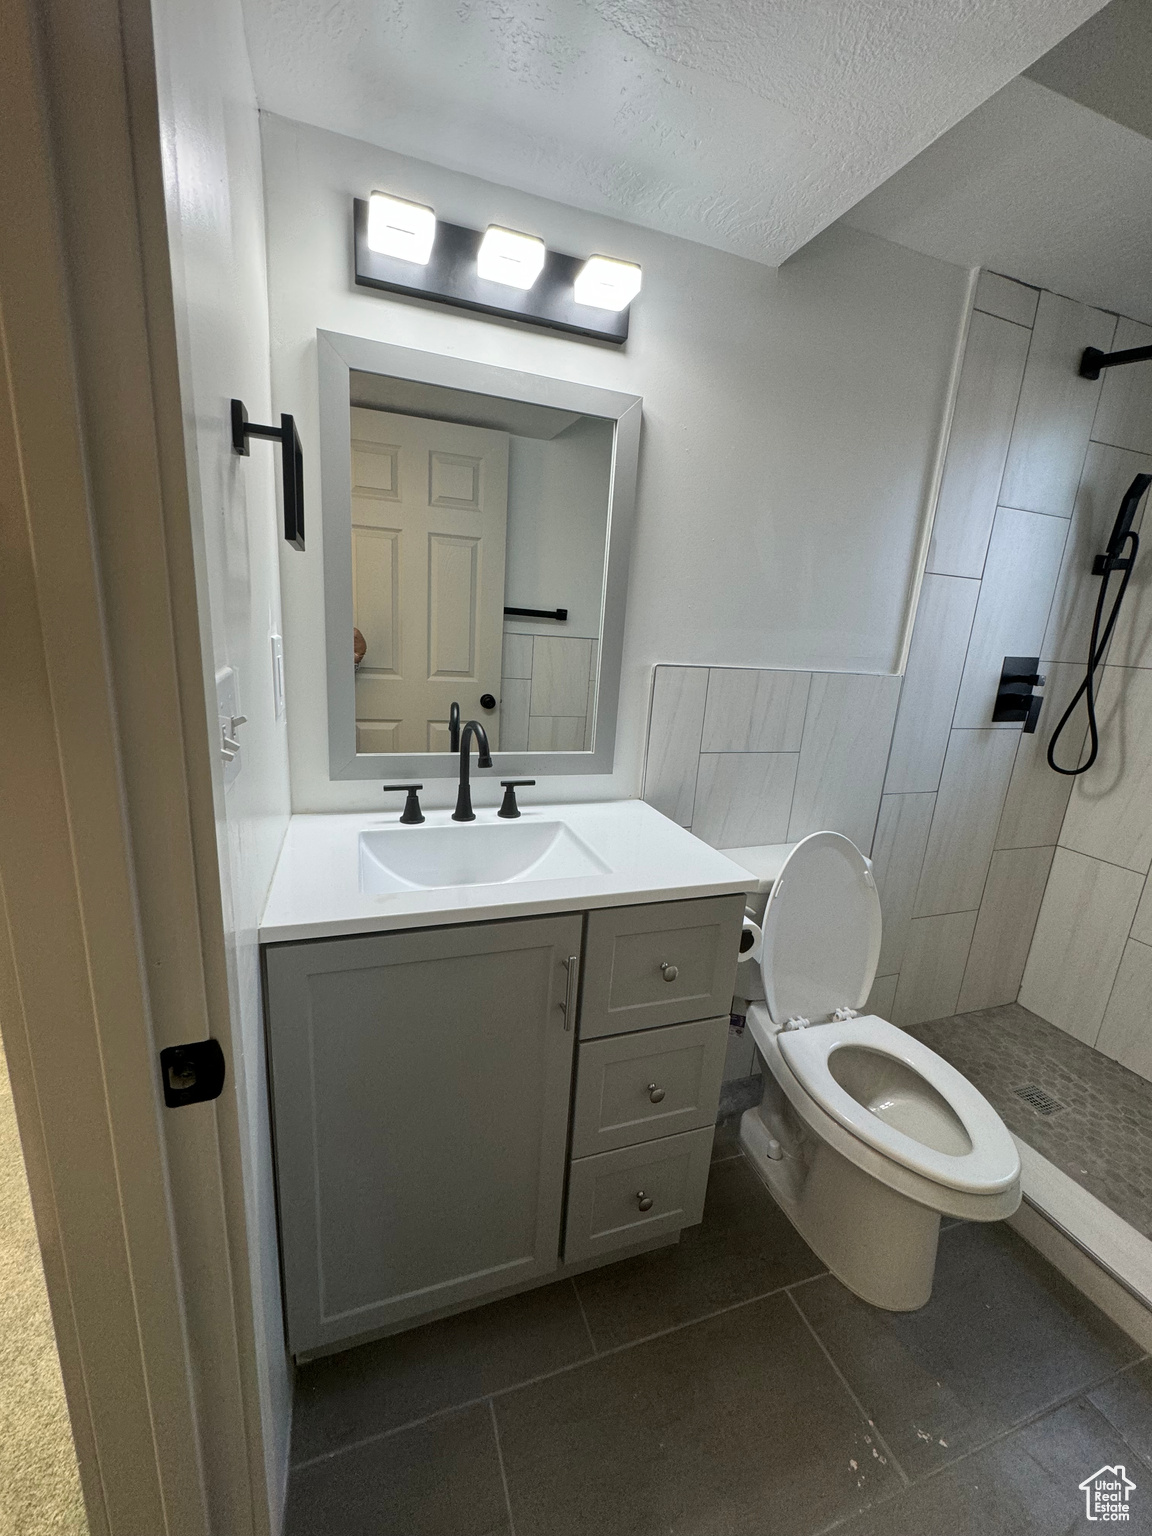 Bathroom with a tile shower, tile floors, vanity with extensive cabinet space, and toilet